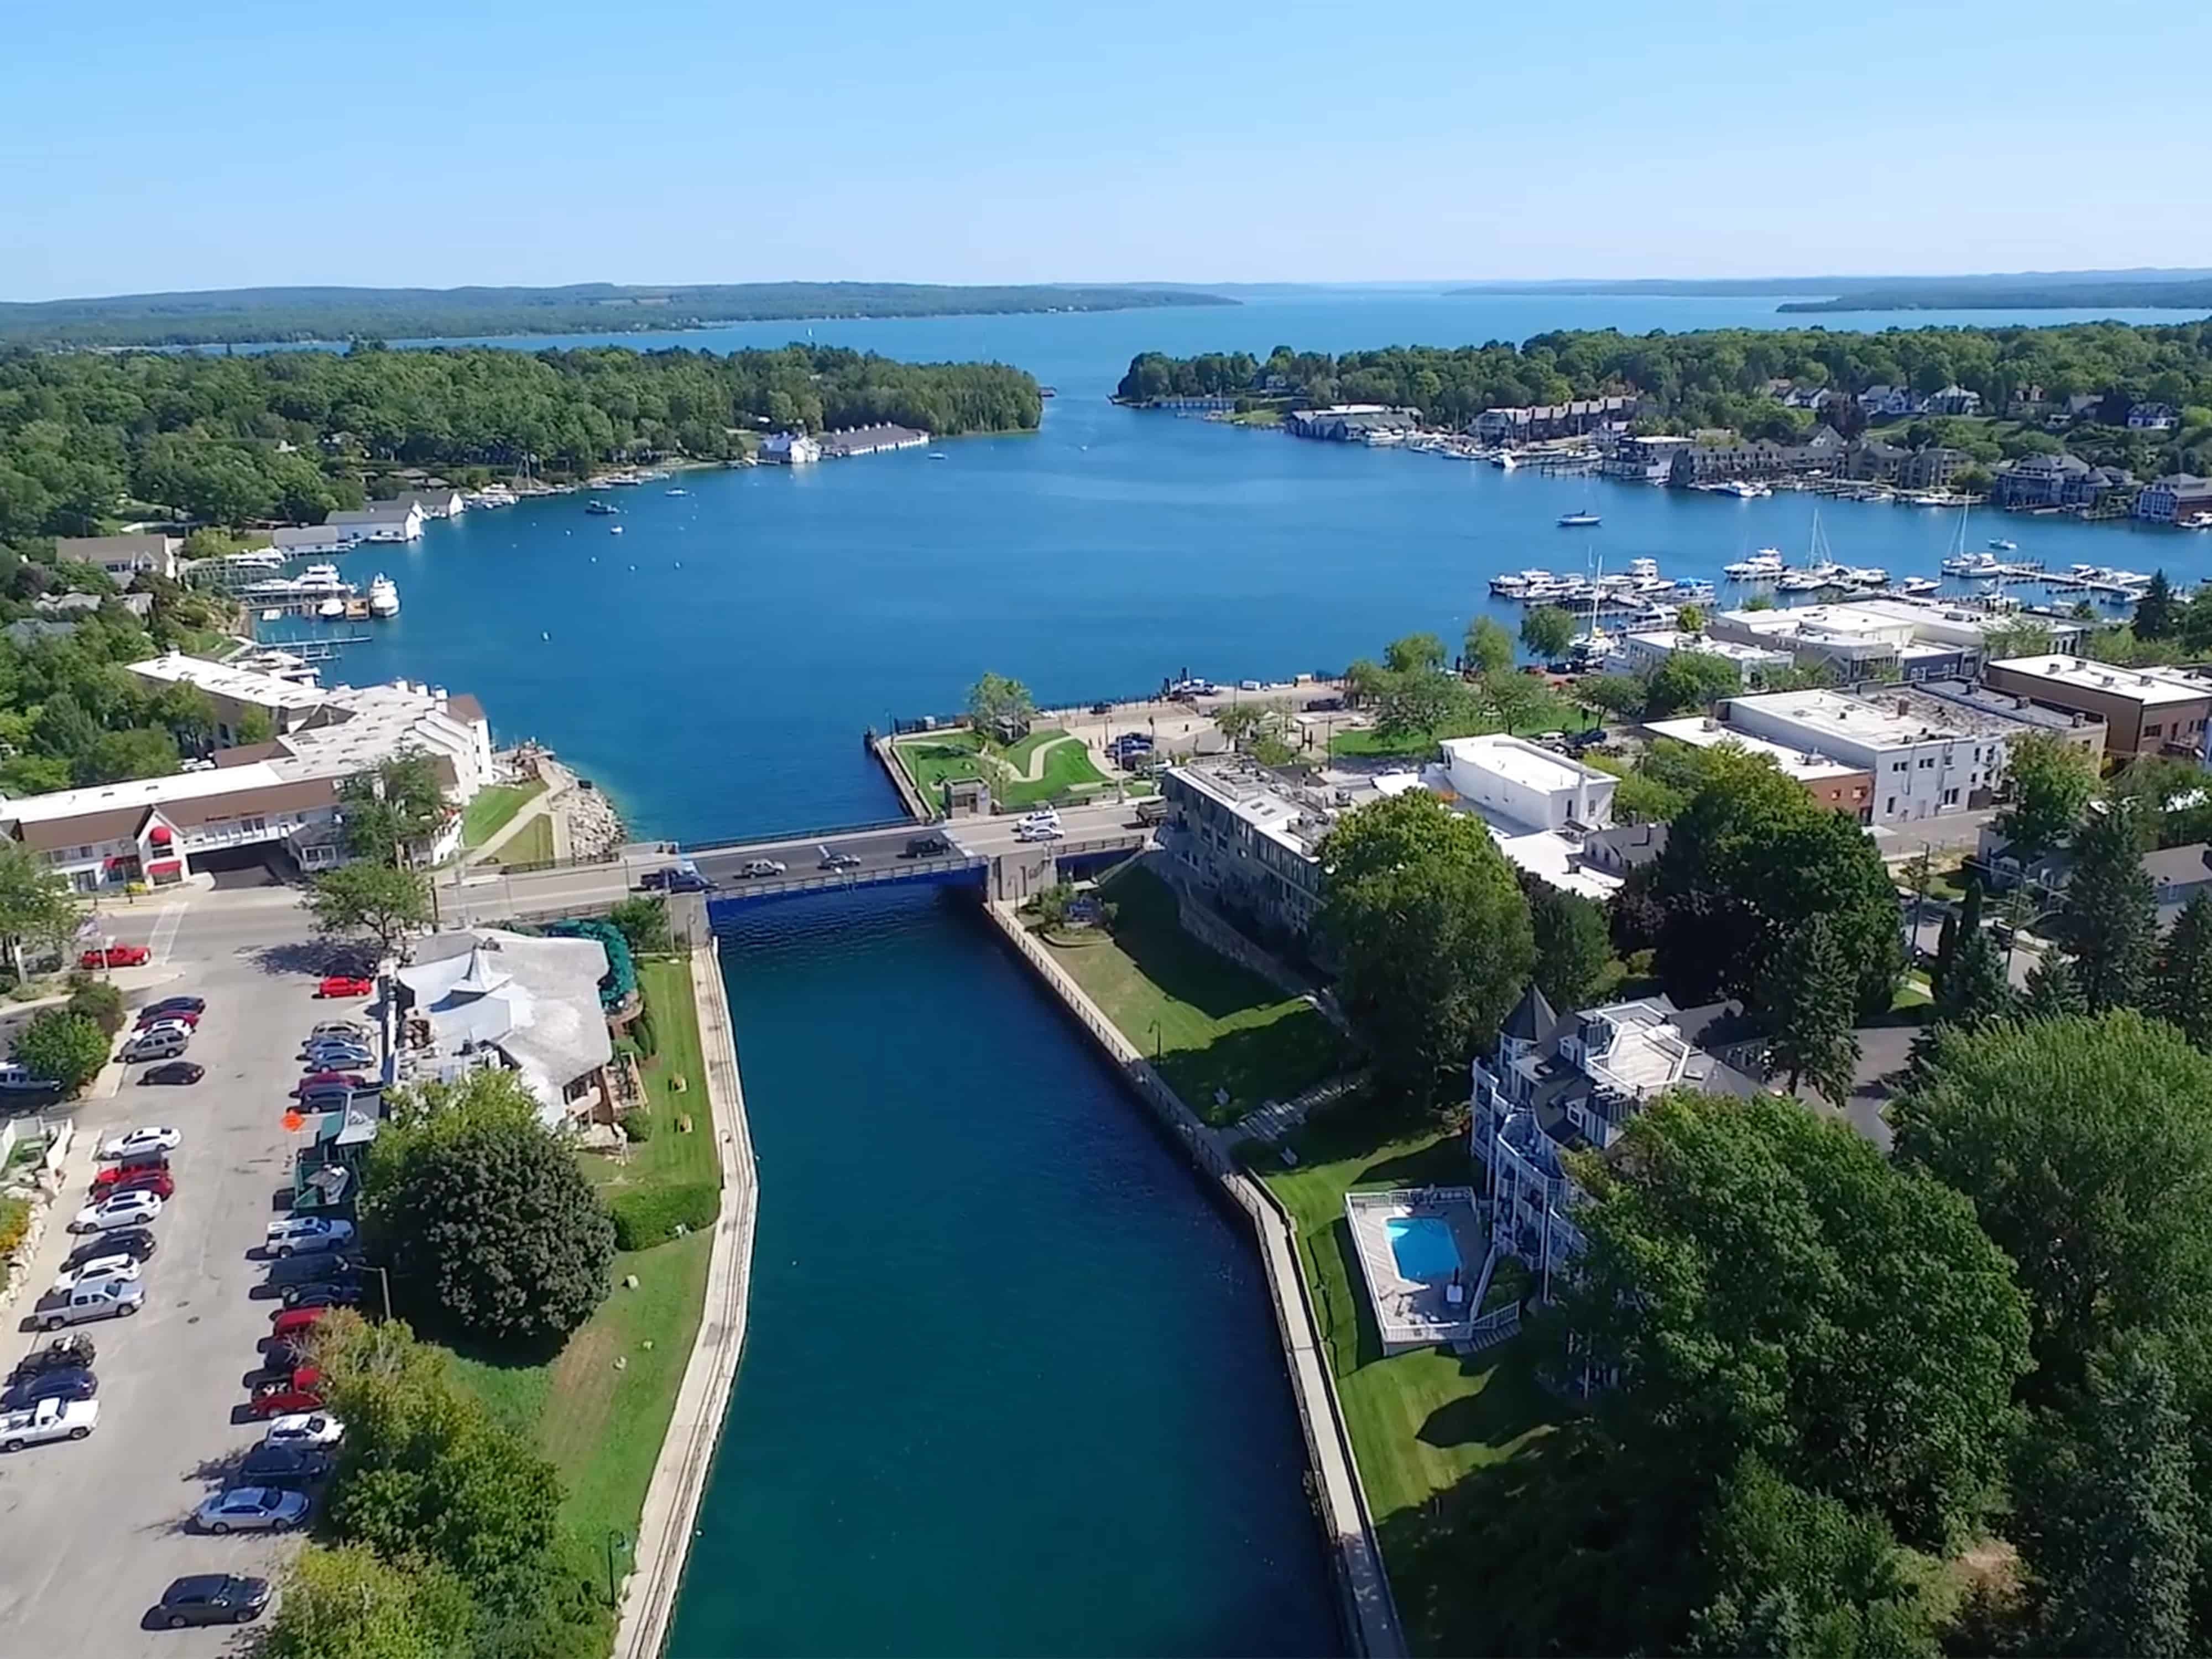 View of Charlevoix, Michigan, showing scenic lakefront, historic sites, and outdoor activities.